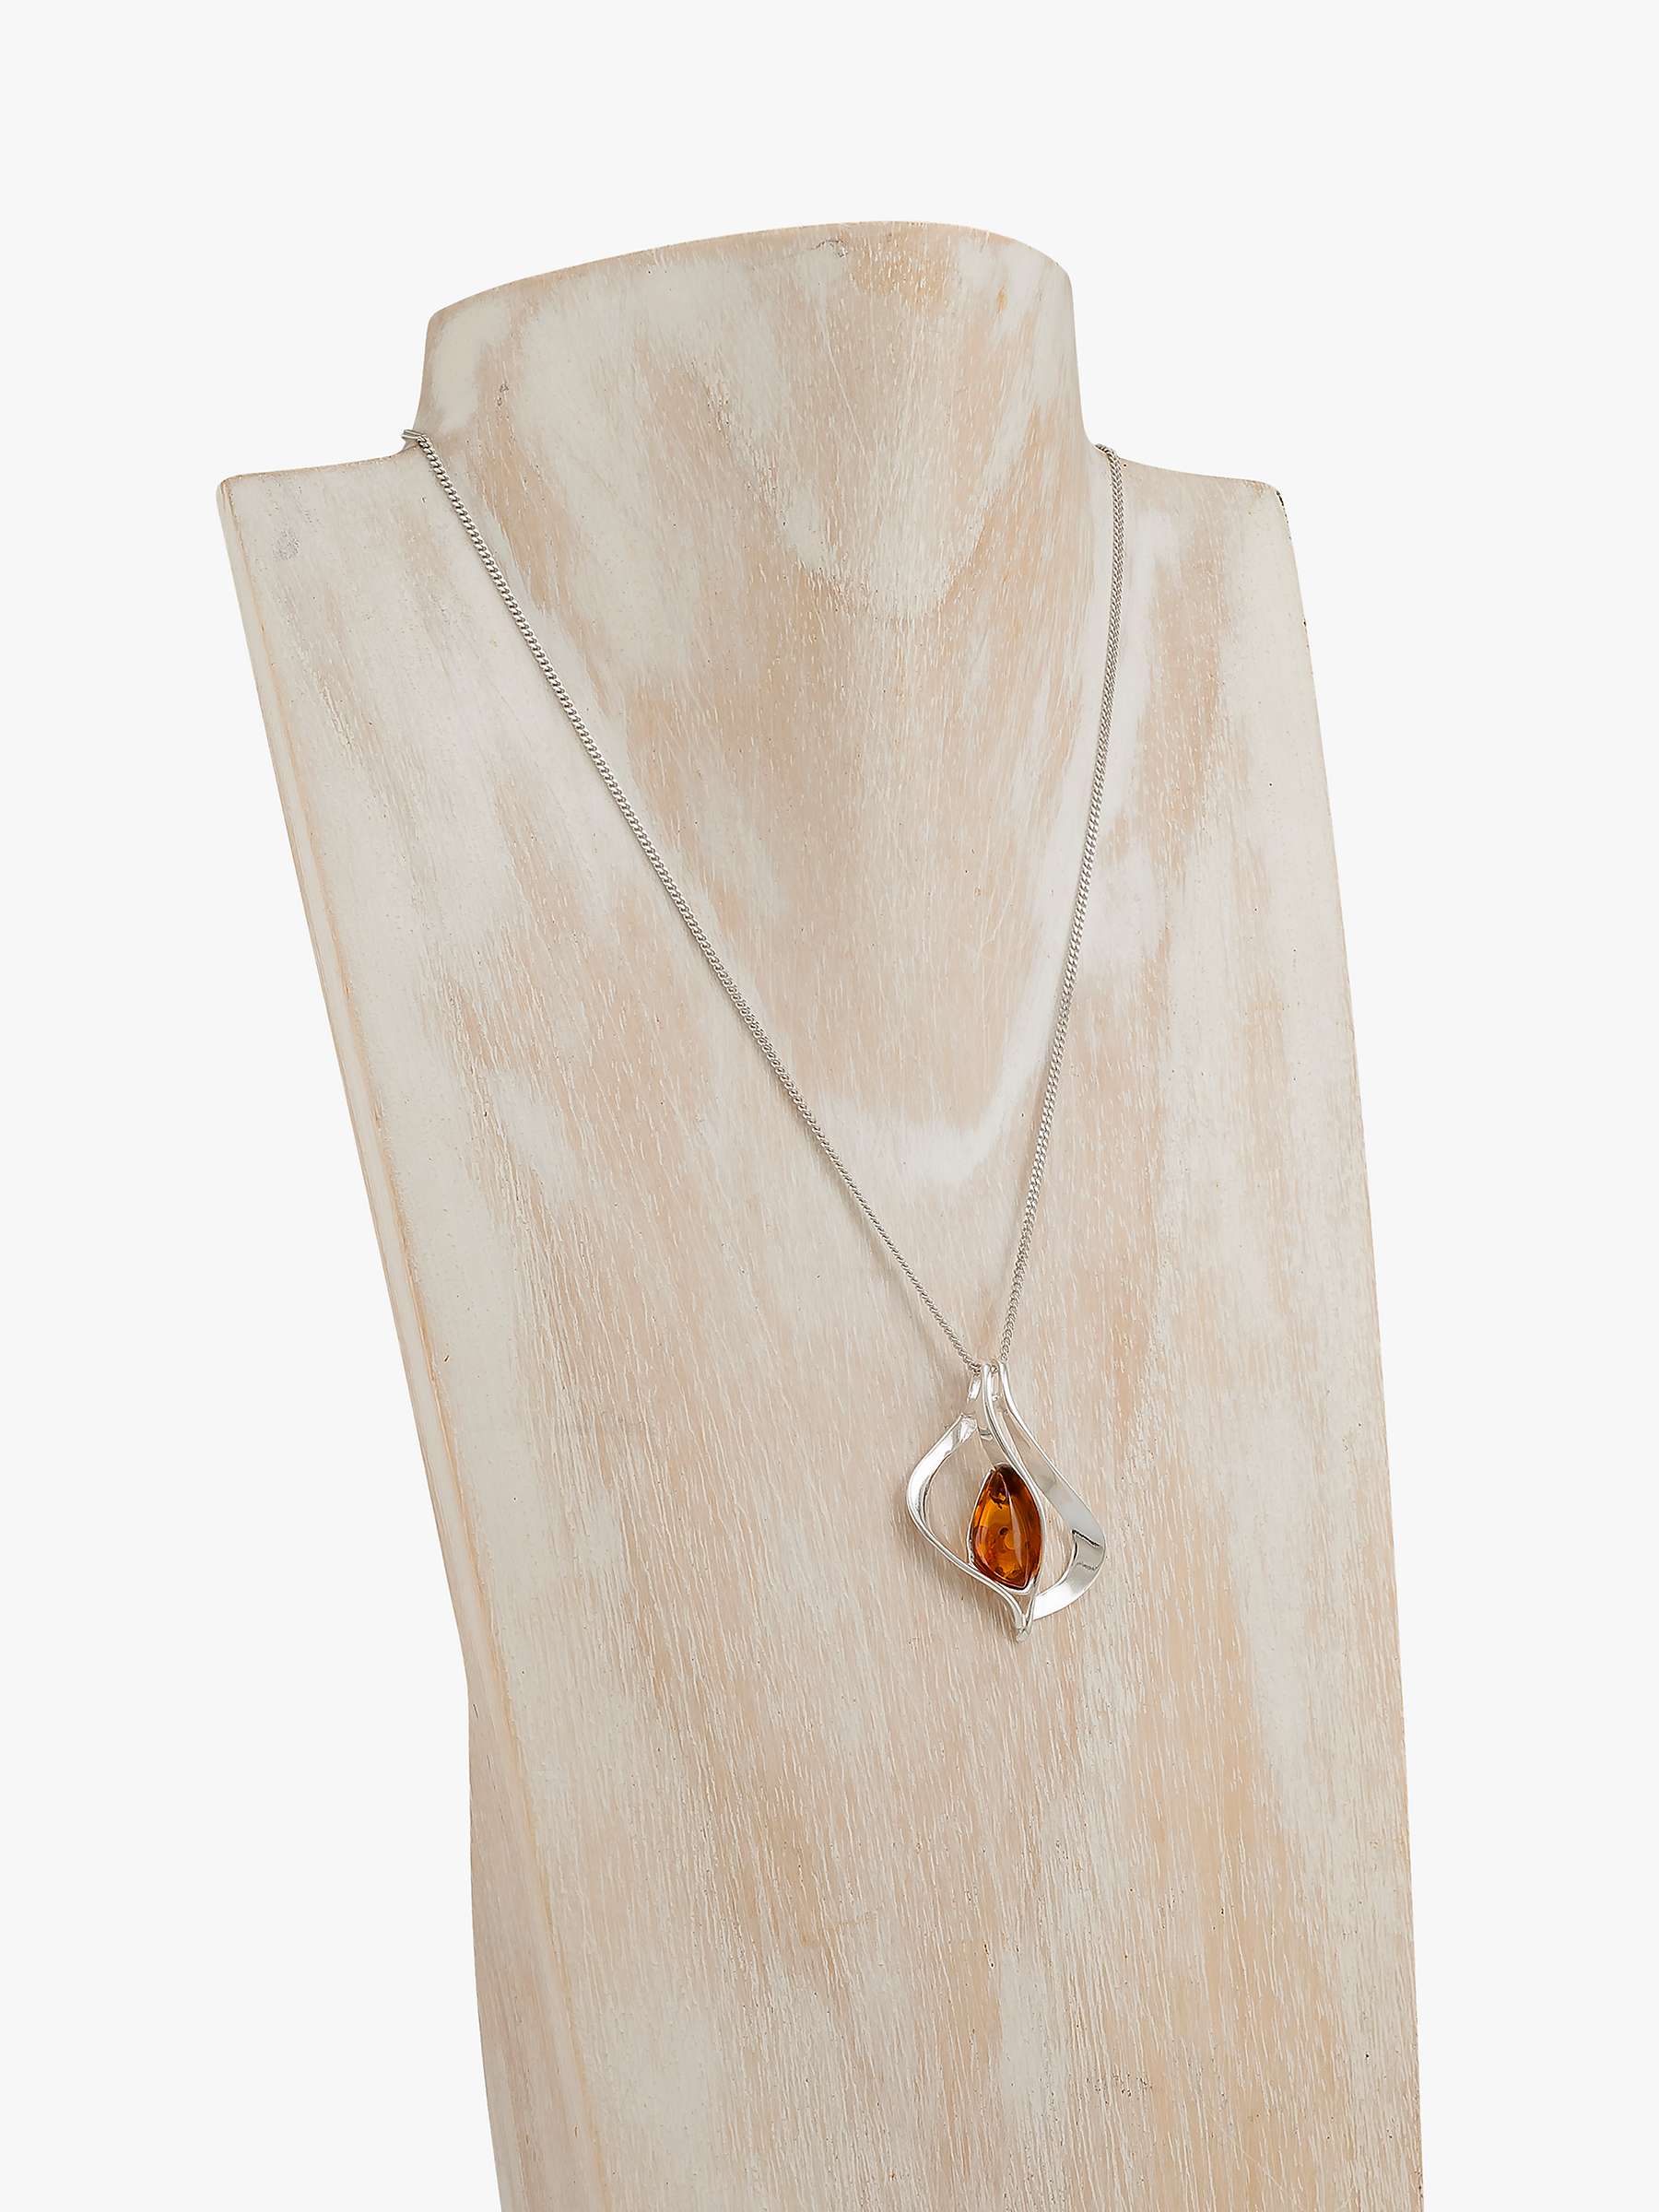 Buy Be-Jewelled Baltic Pendant Necklace, Silver/Cognac Online at johnlewis.com